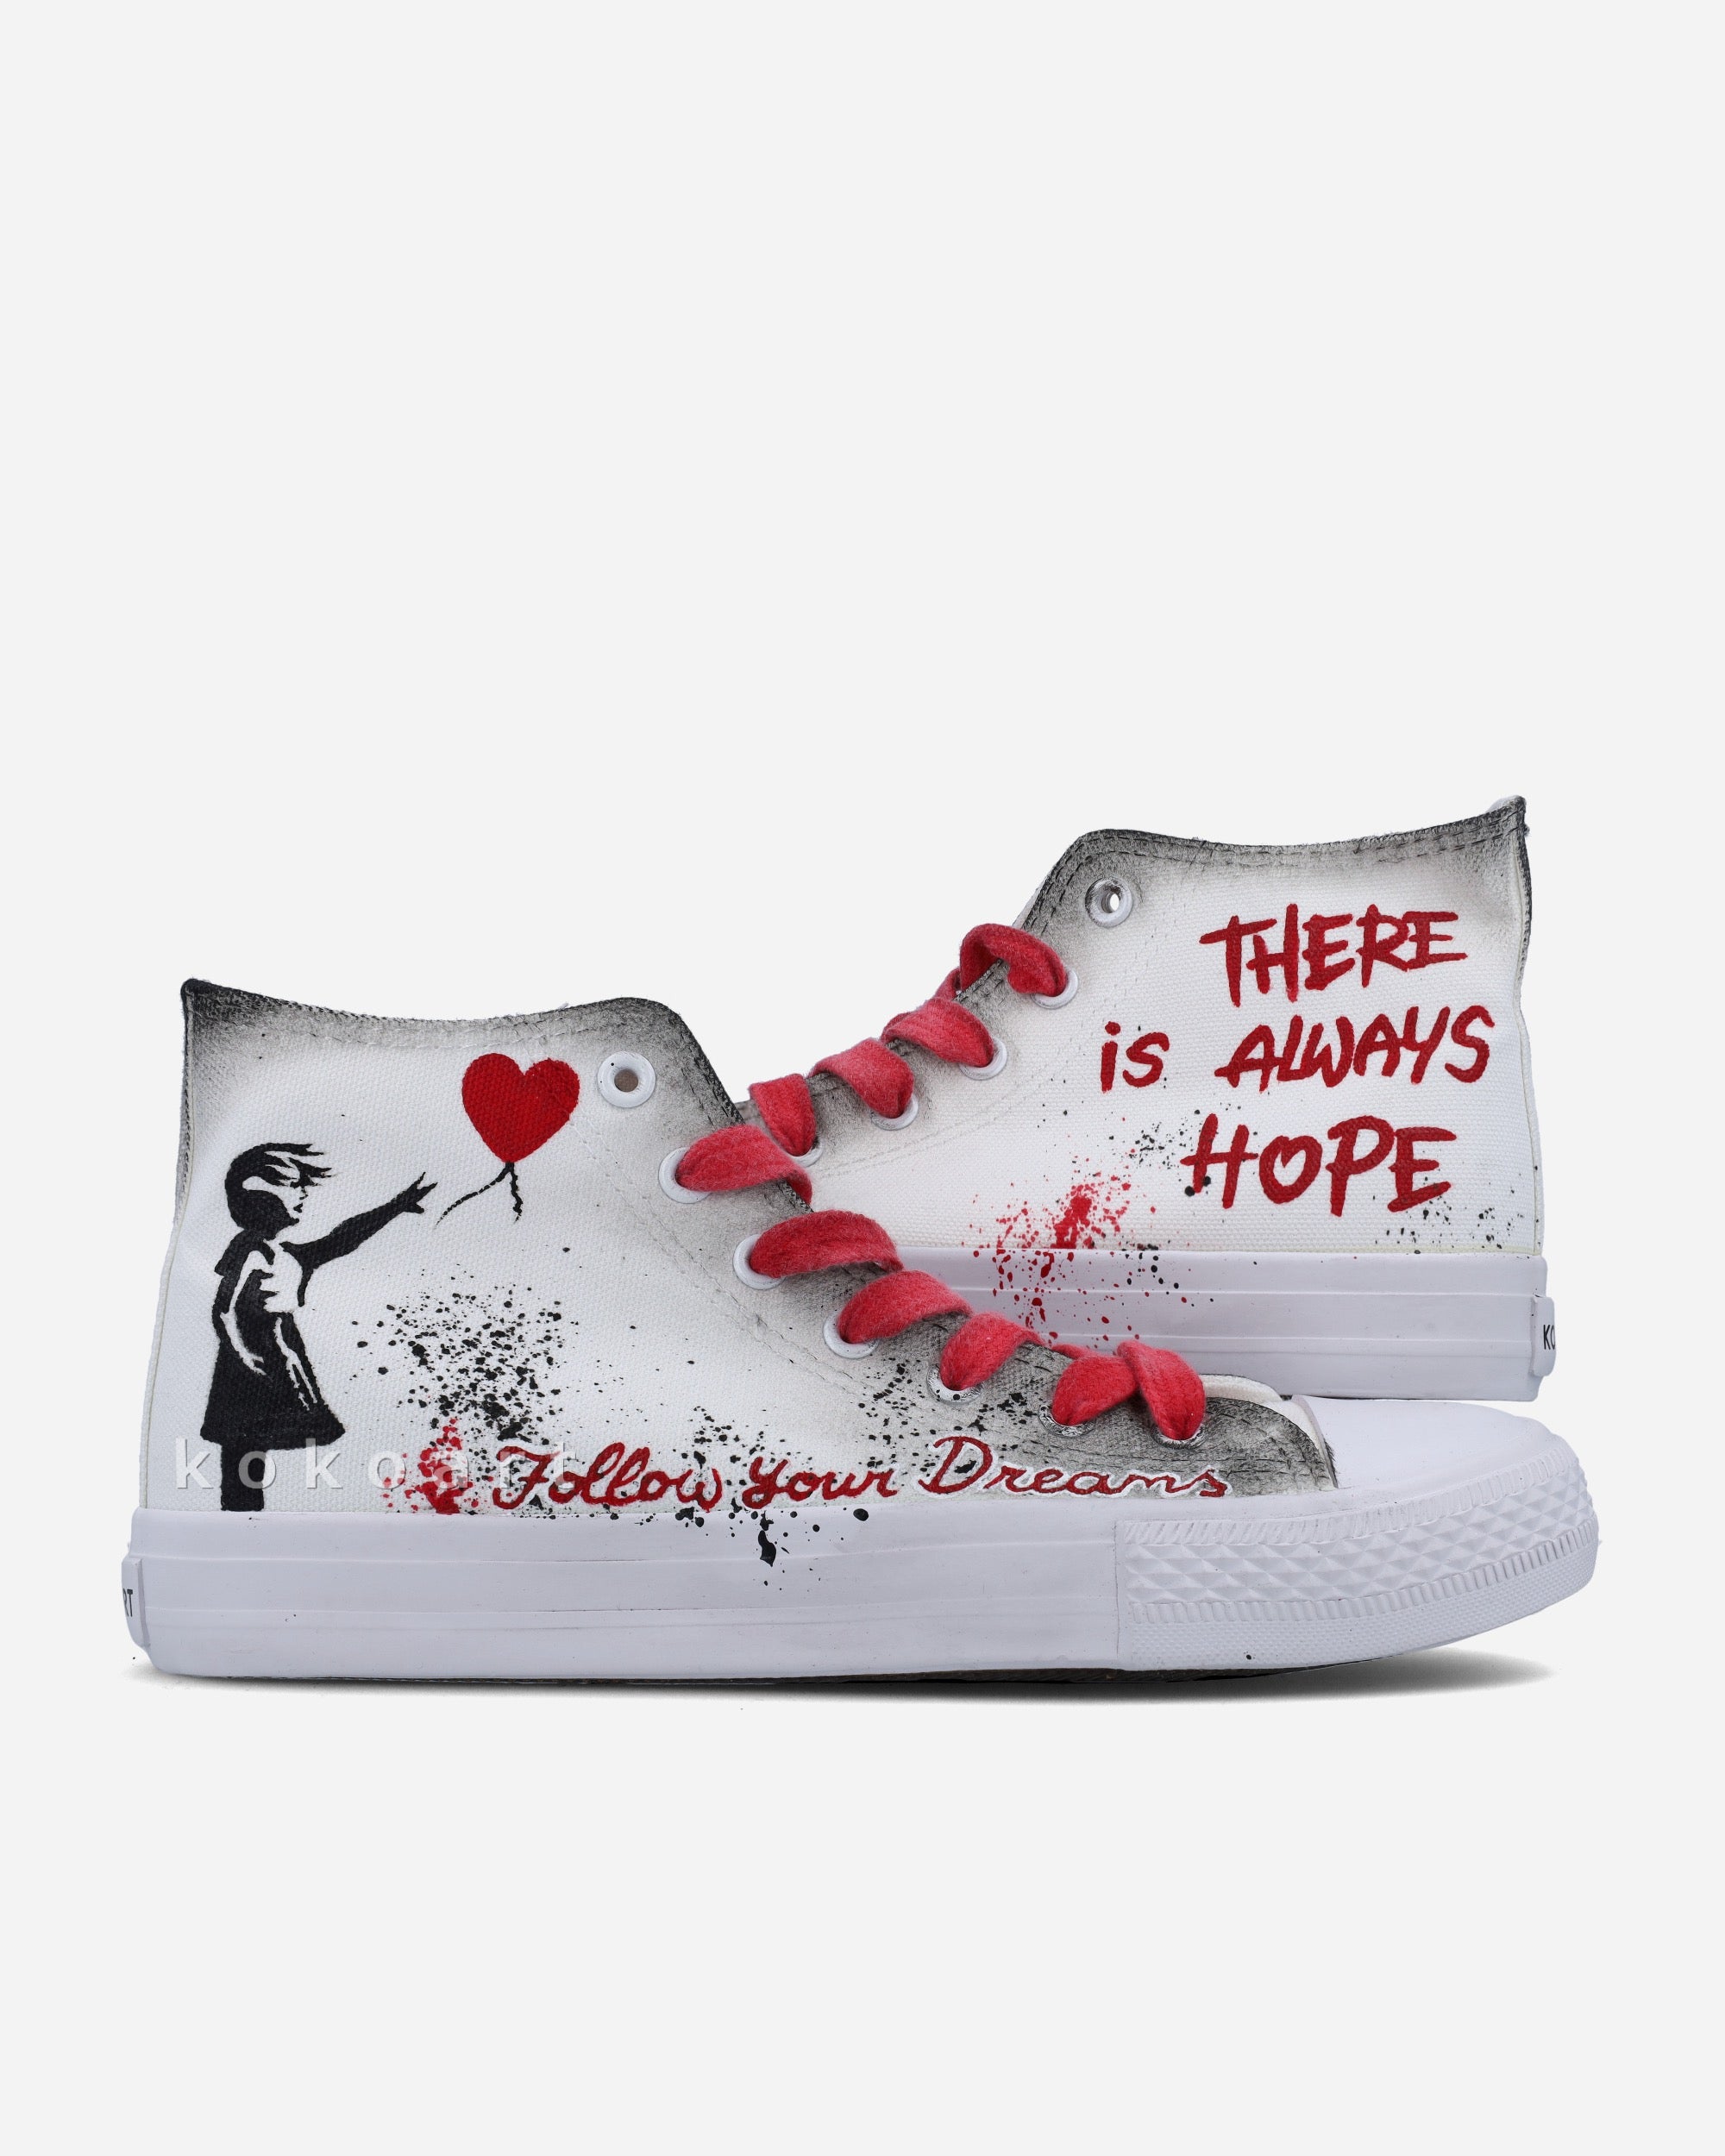 Banksy Girl with Balloon Hand Painted Shoes